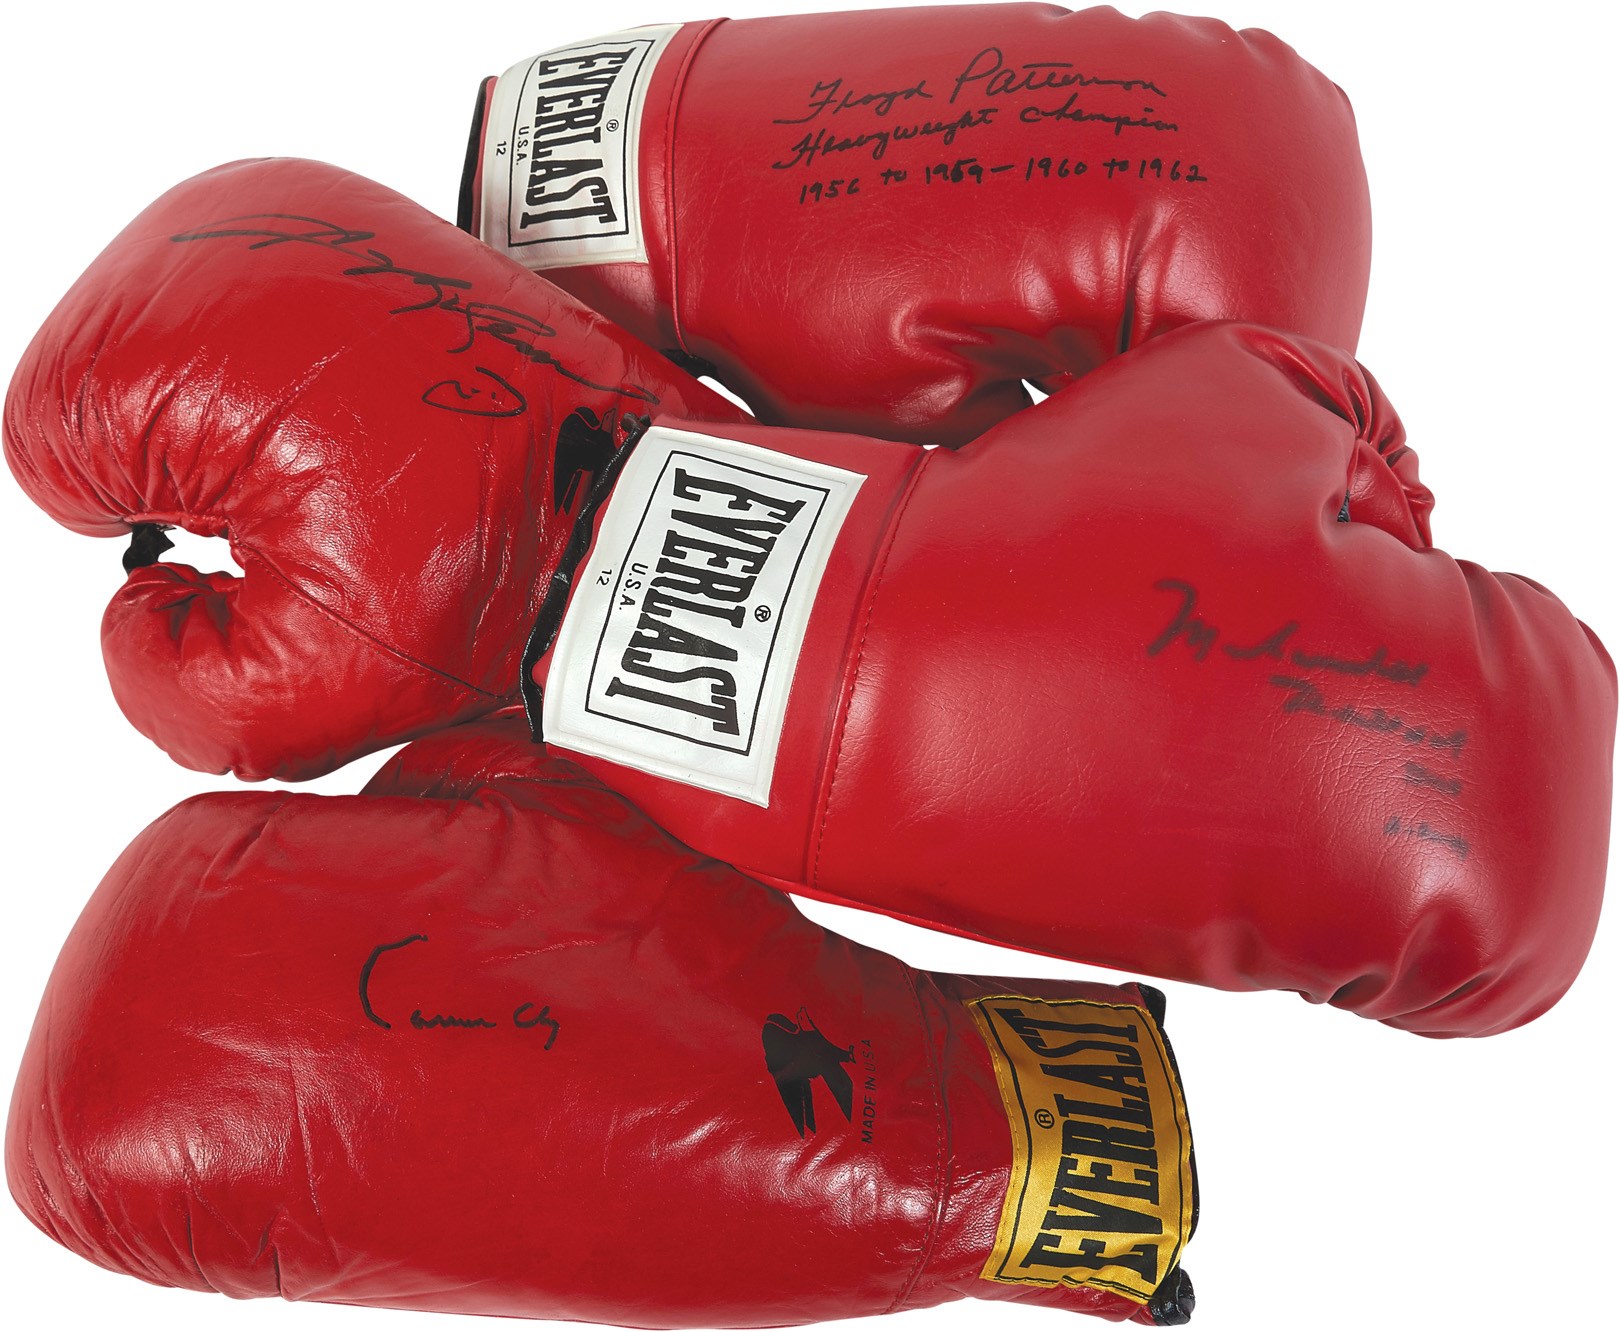 Cassius Clay, Muhammad Ali, Leonard & Patterson Signed Boxing Gloves